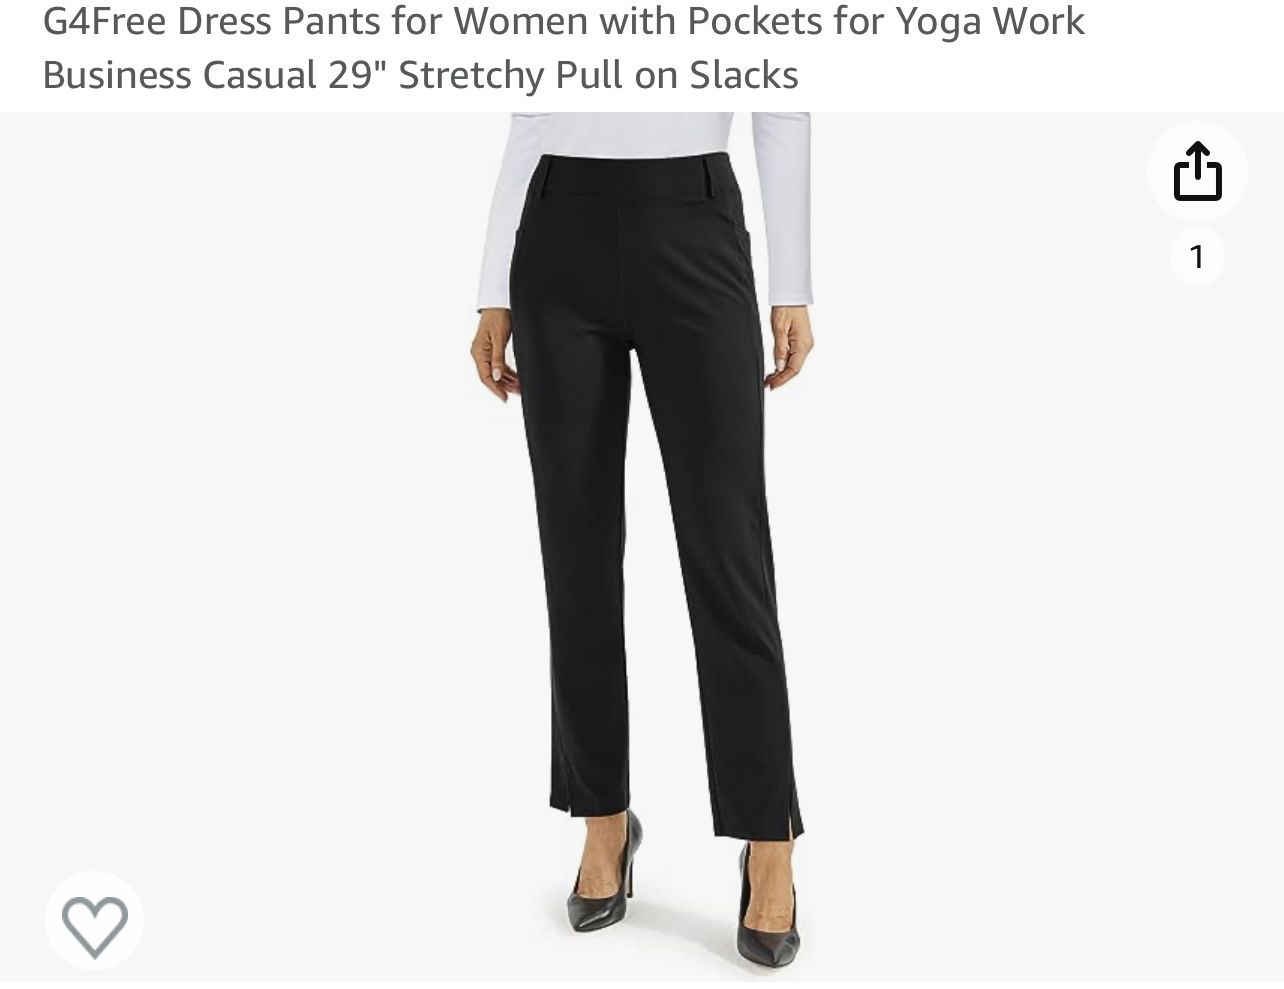 G4Free Dress Pants for Women with Pockets for Yoga Work Business